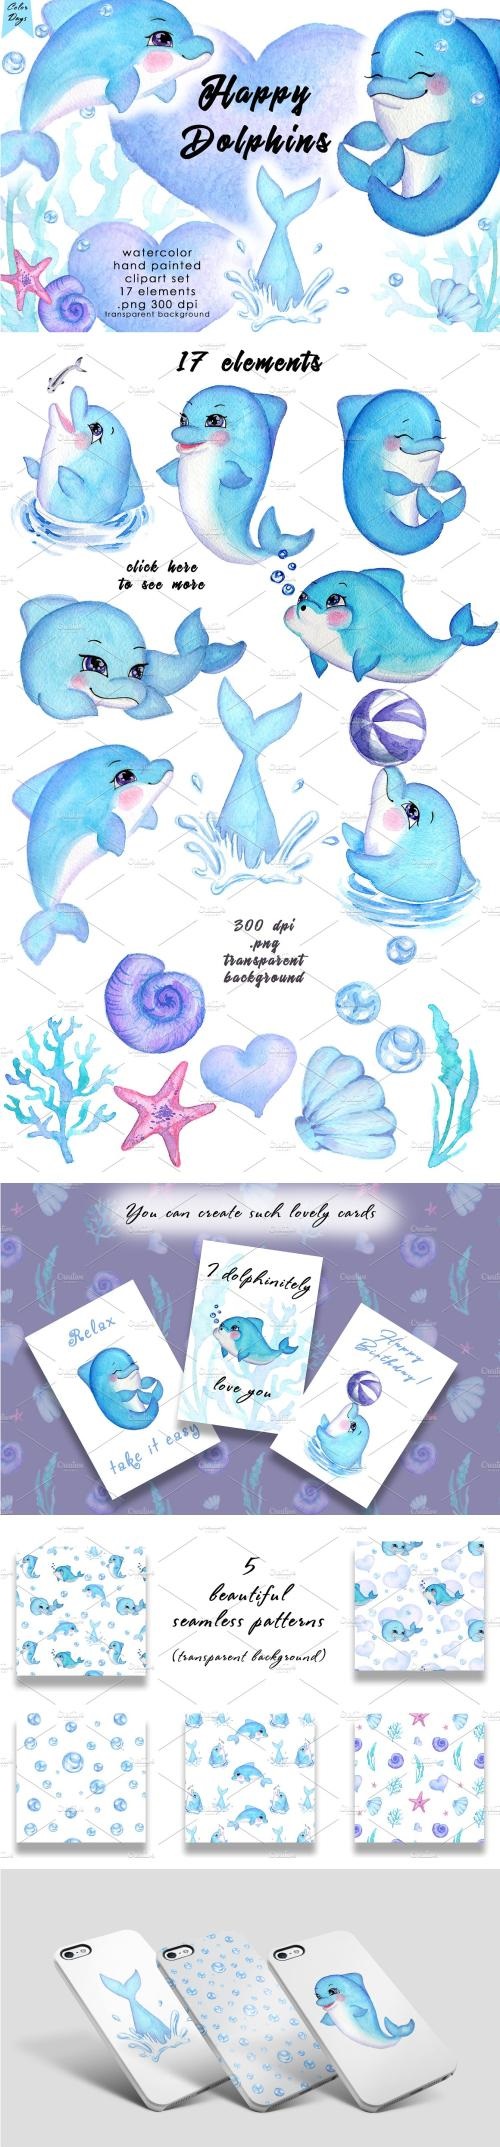 Watercolor Clipart - Happy Dolphins - 1989805